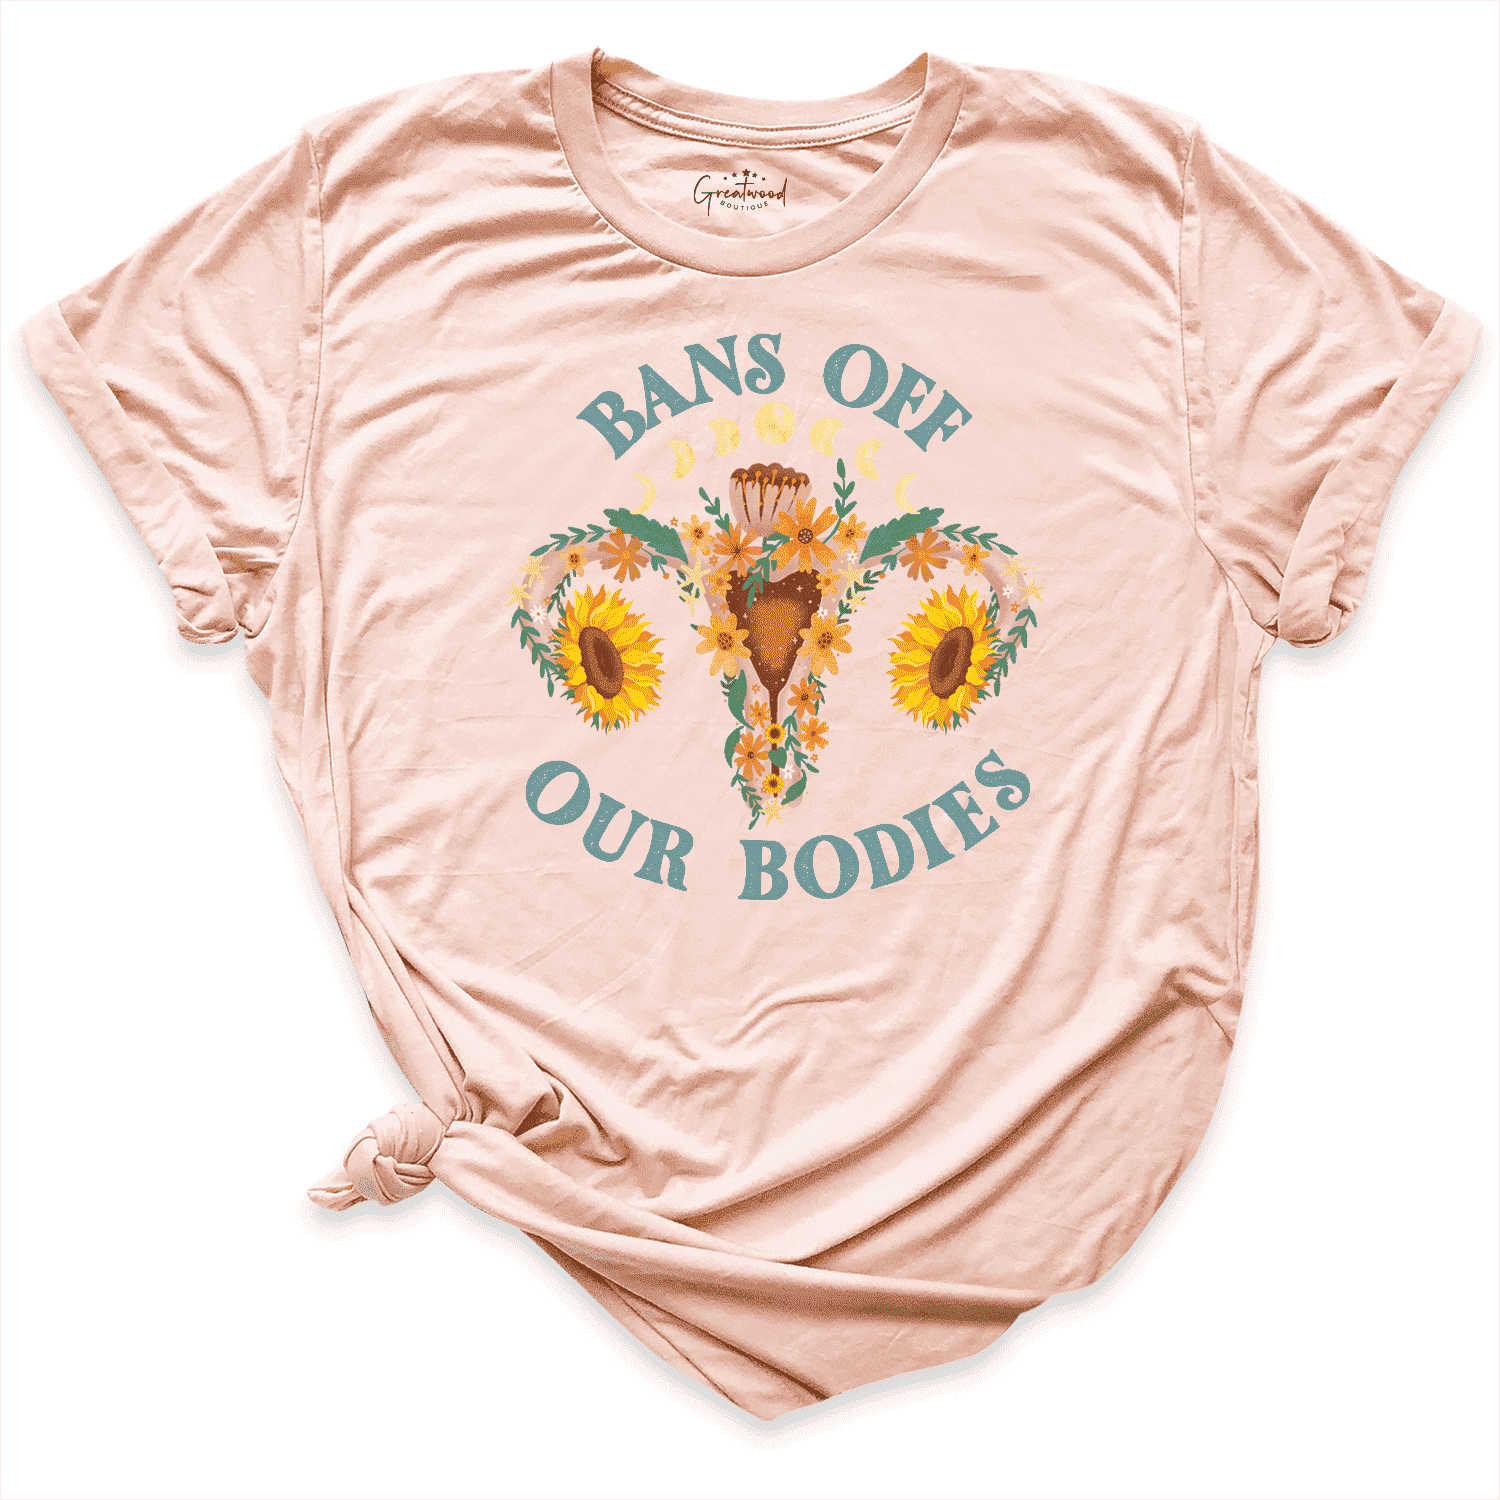 Bans Off Our Bodies Shirt Peach - Greatwood Boutique